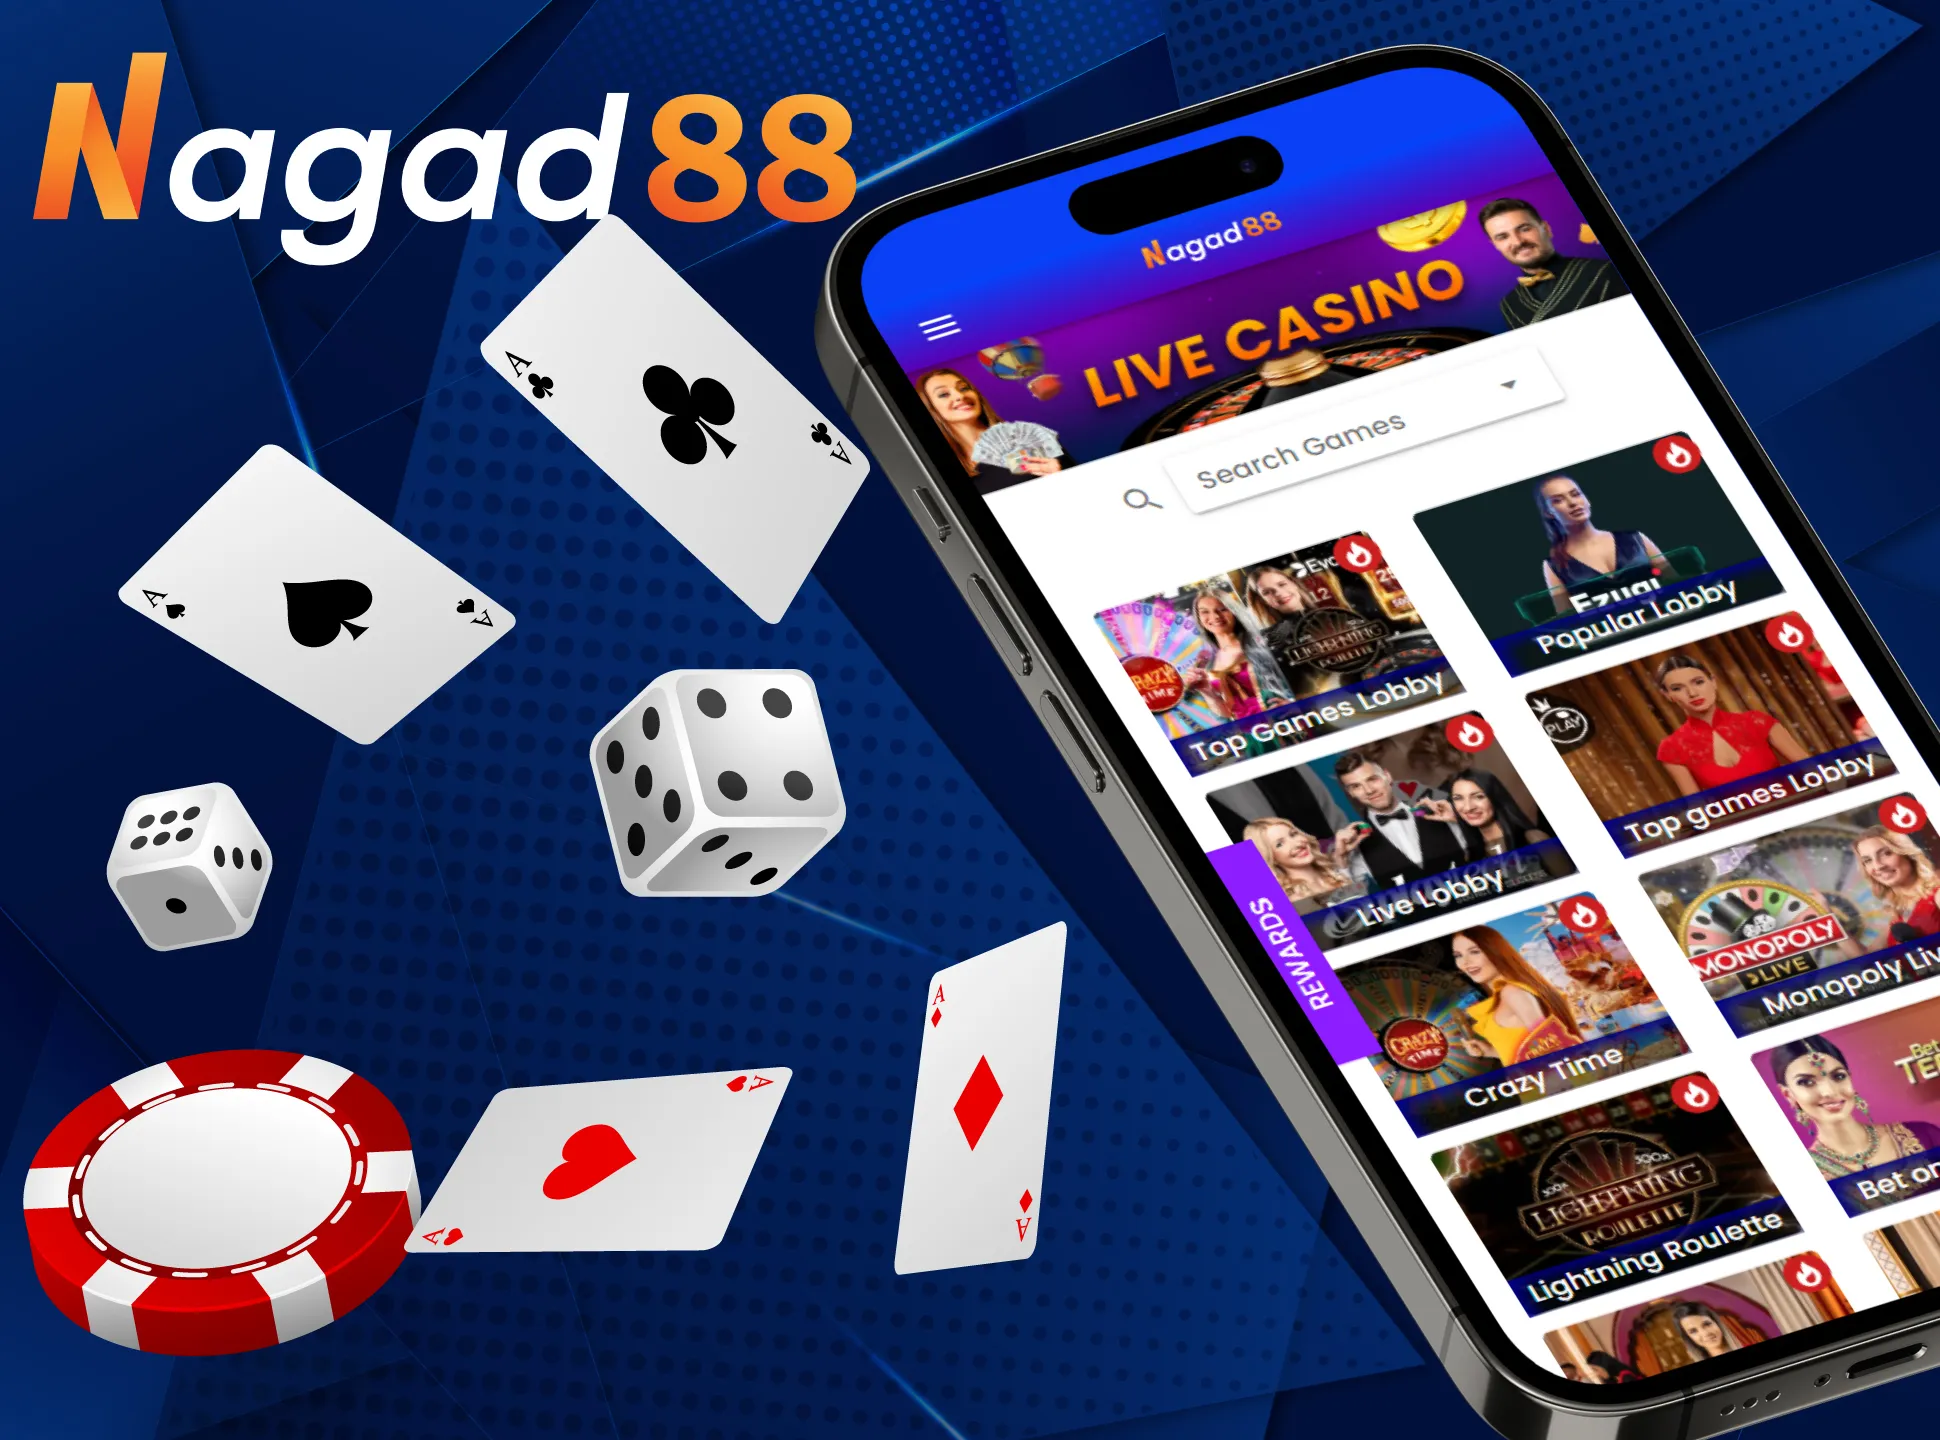 Be sure to go to the casino section of the Nagad88 app.